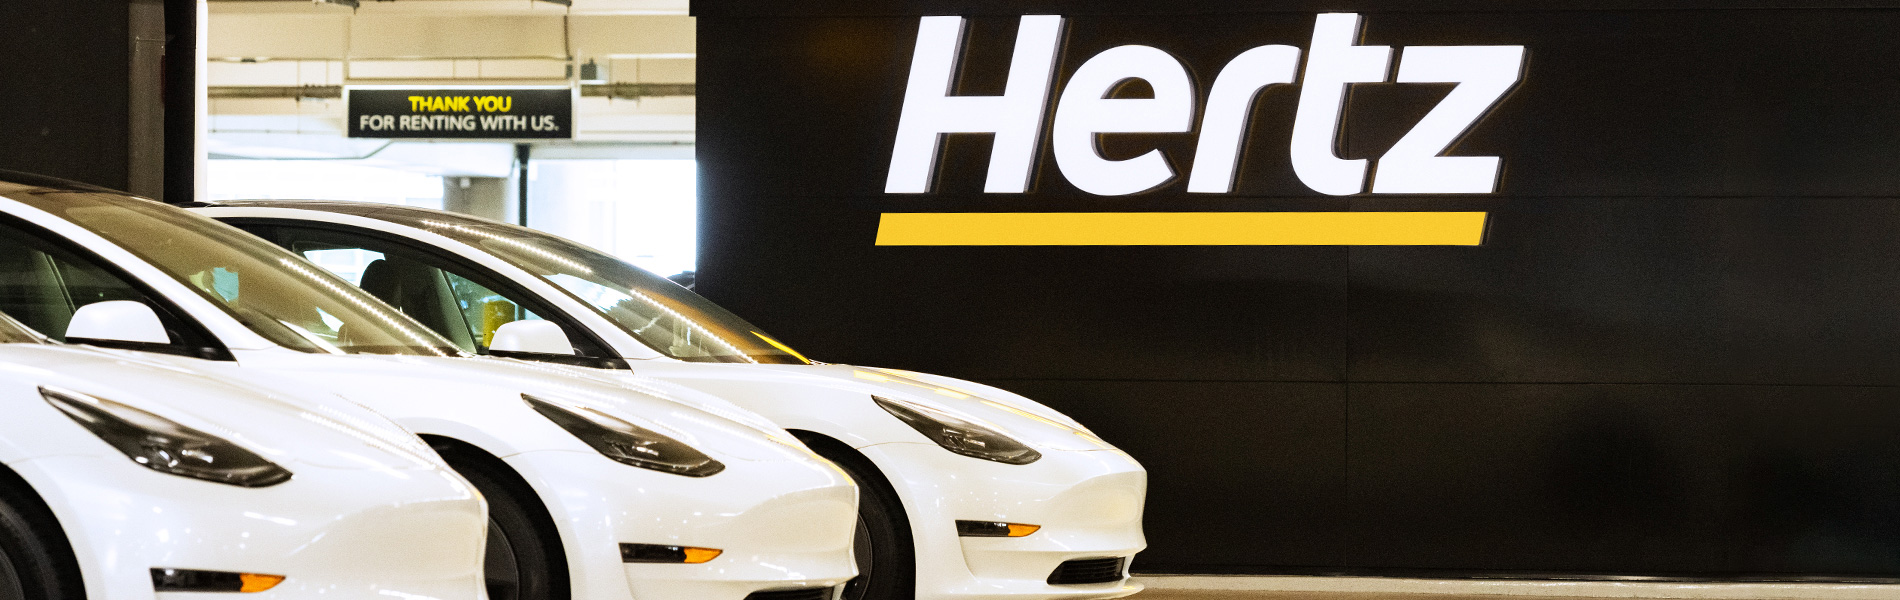 Hertz Invests in Largest Electric Vehicle Rental Fleet and Partners